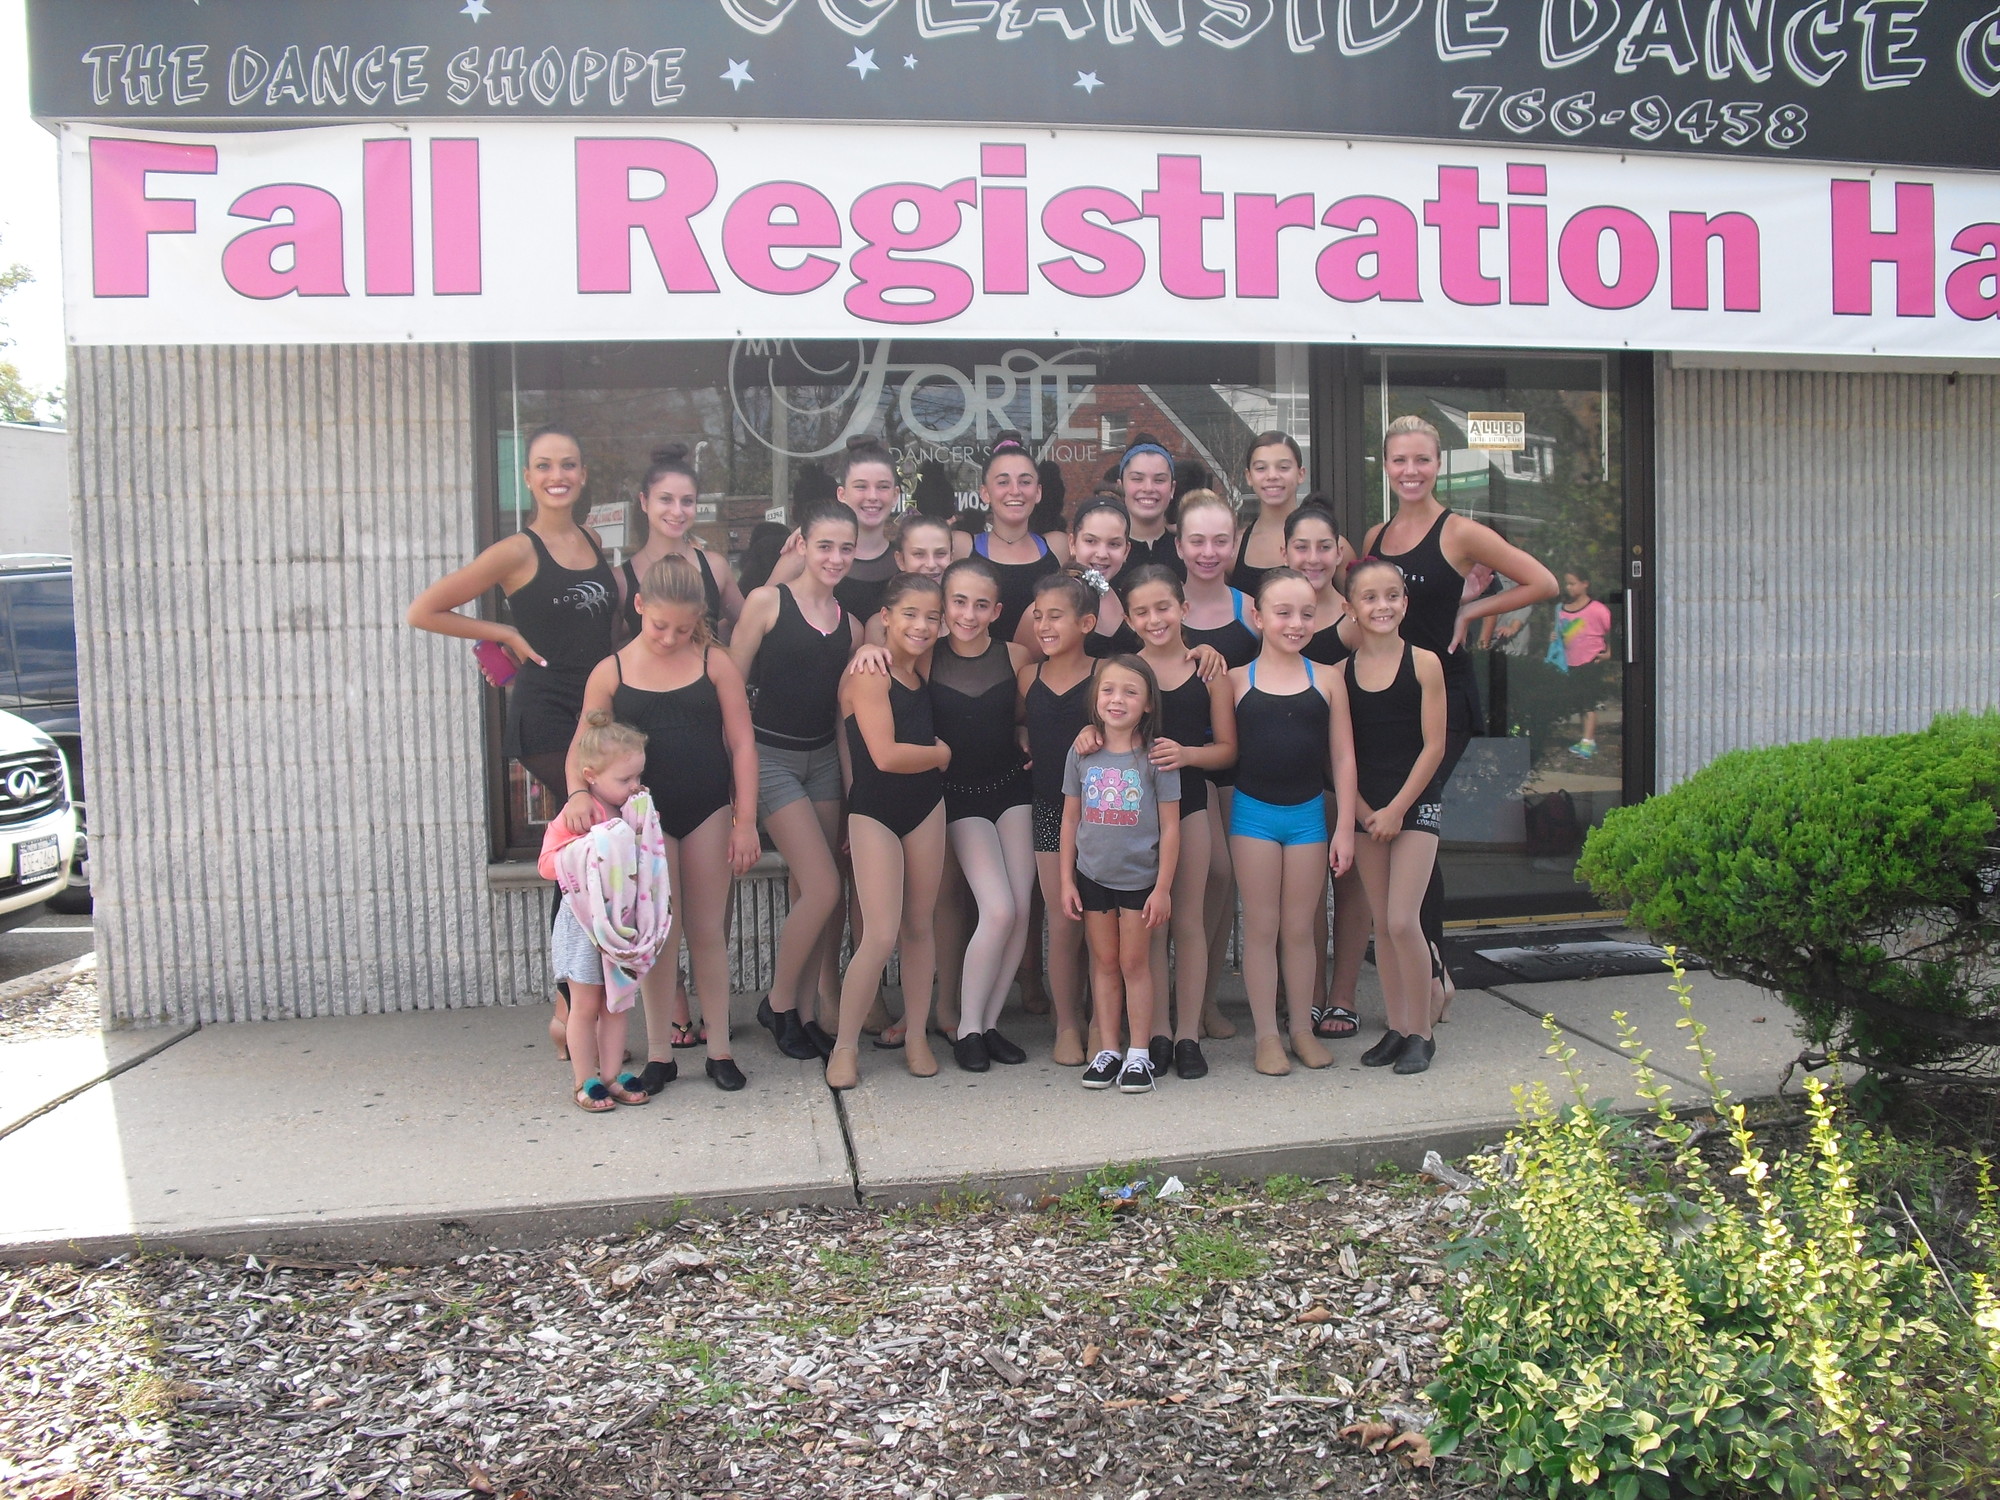 Rockettes Eleni Gavalas, far left, and Tara Dunleavy, far right, and the dance students outside of the Oceanside Dance Center.